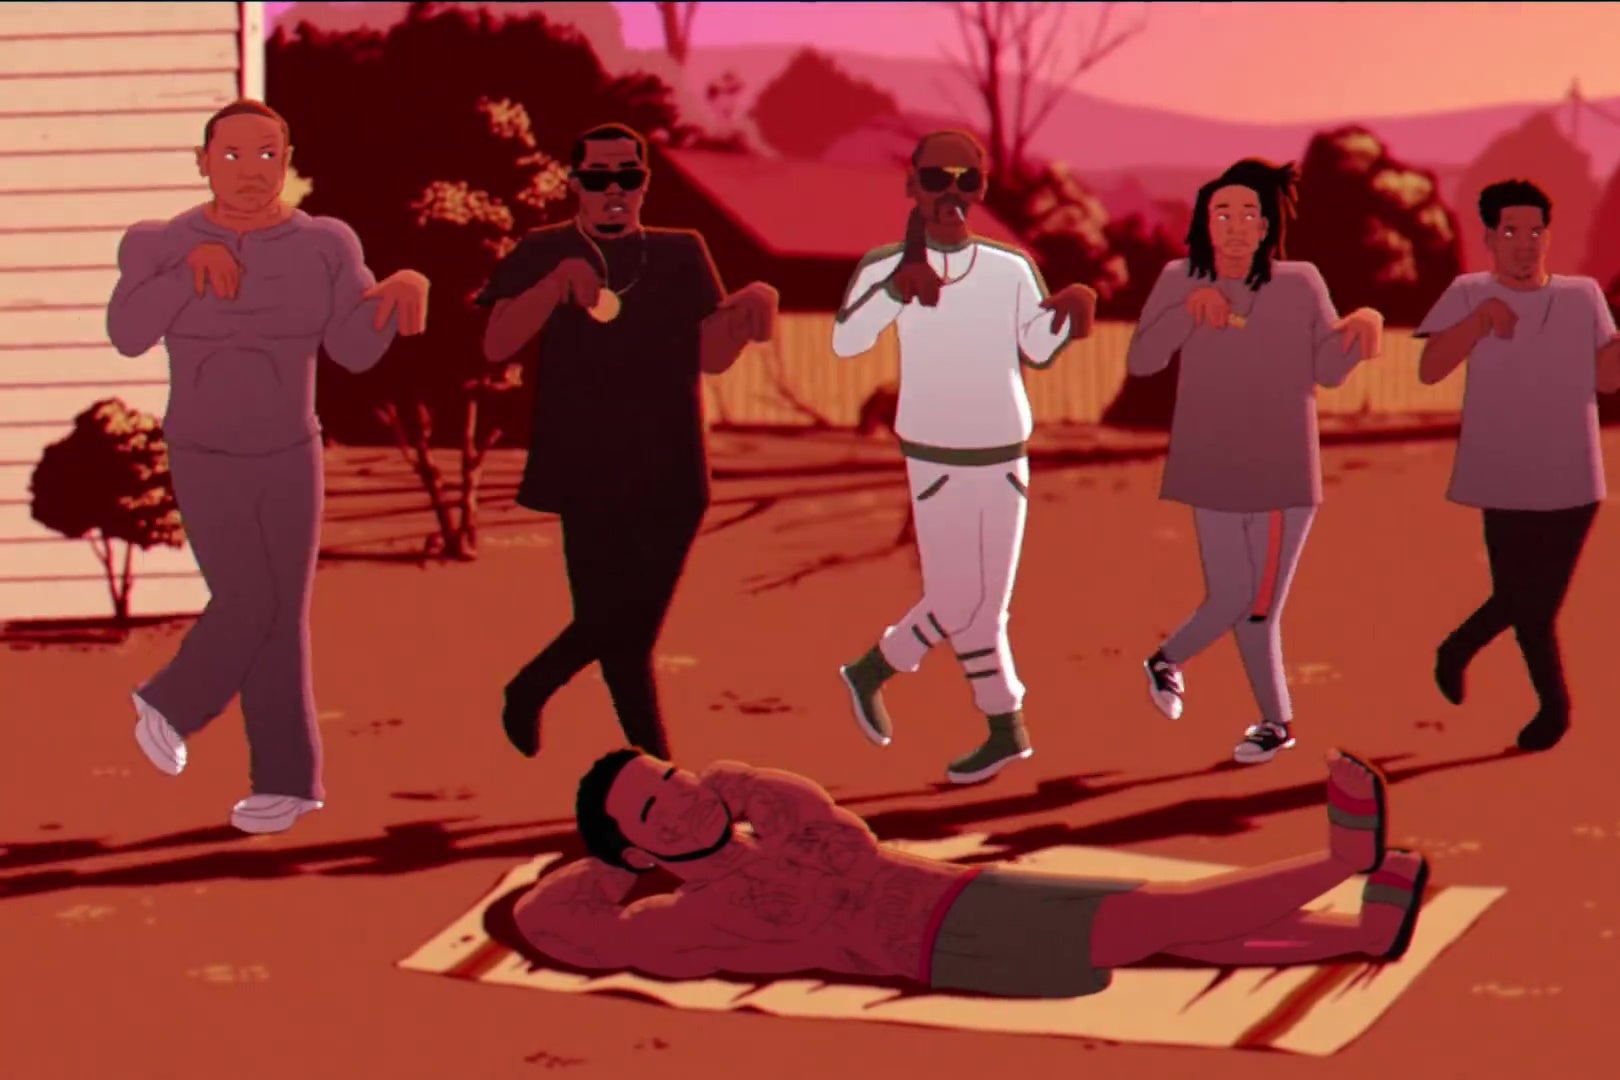 From left, Dr. Dre, Puffy, and Snoop Dogg, and then at the end Jay-Z, doing a synchronized dance routine. The fourth guy from the left has most often been identified as Wiz Khalifa, perhaps because of his cool pants.